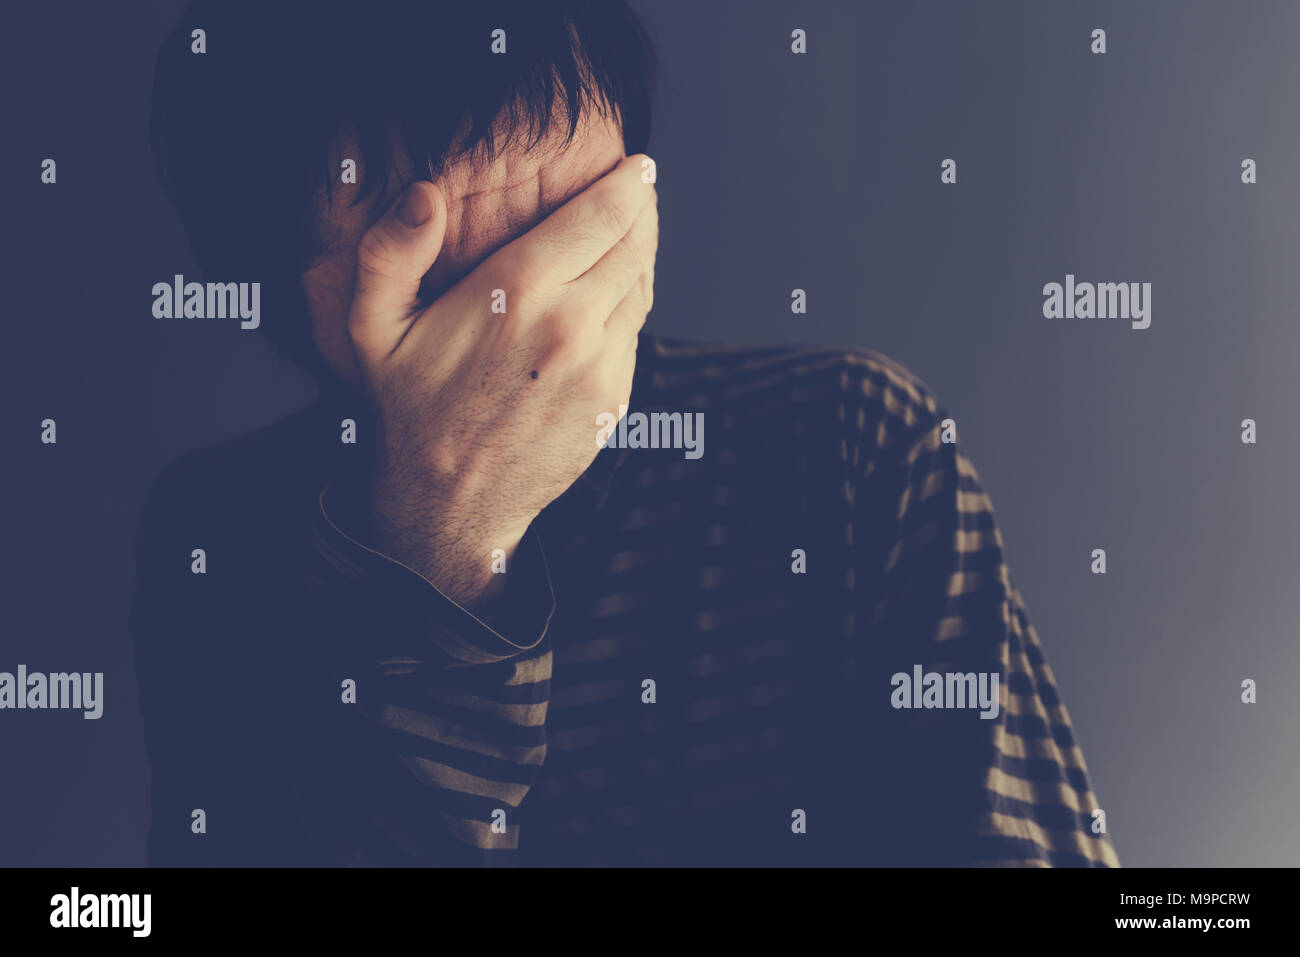 Man crying alone, low key portrait with selective focus Stock Photo